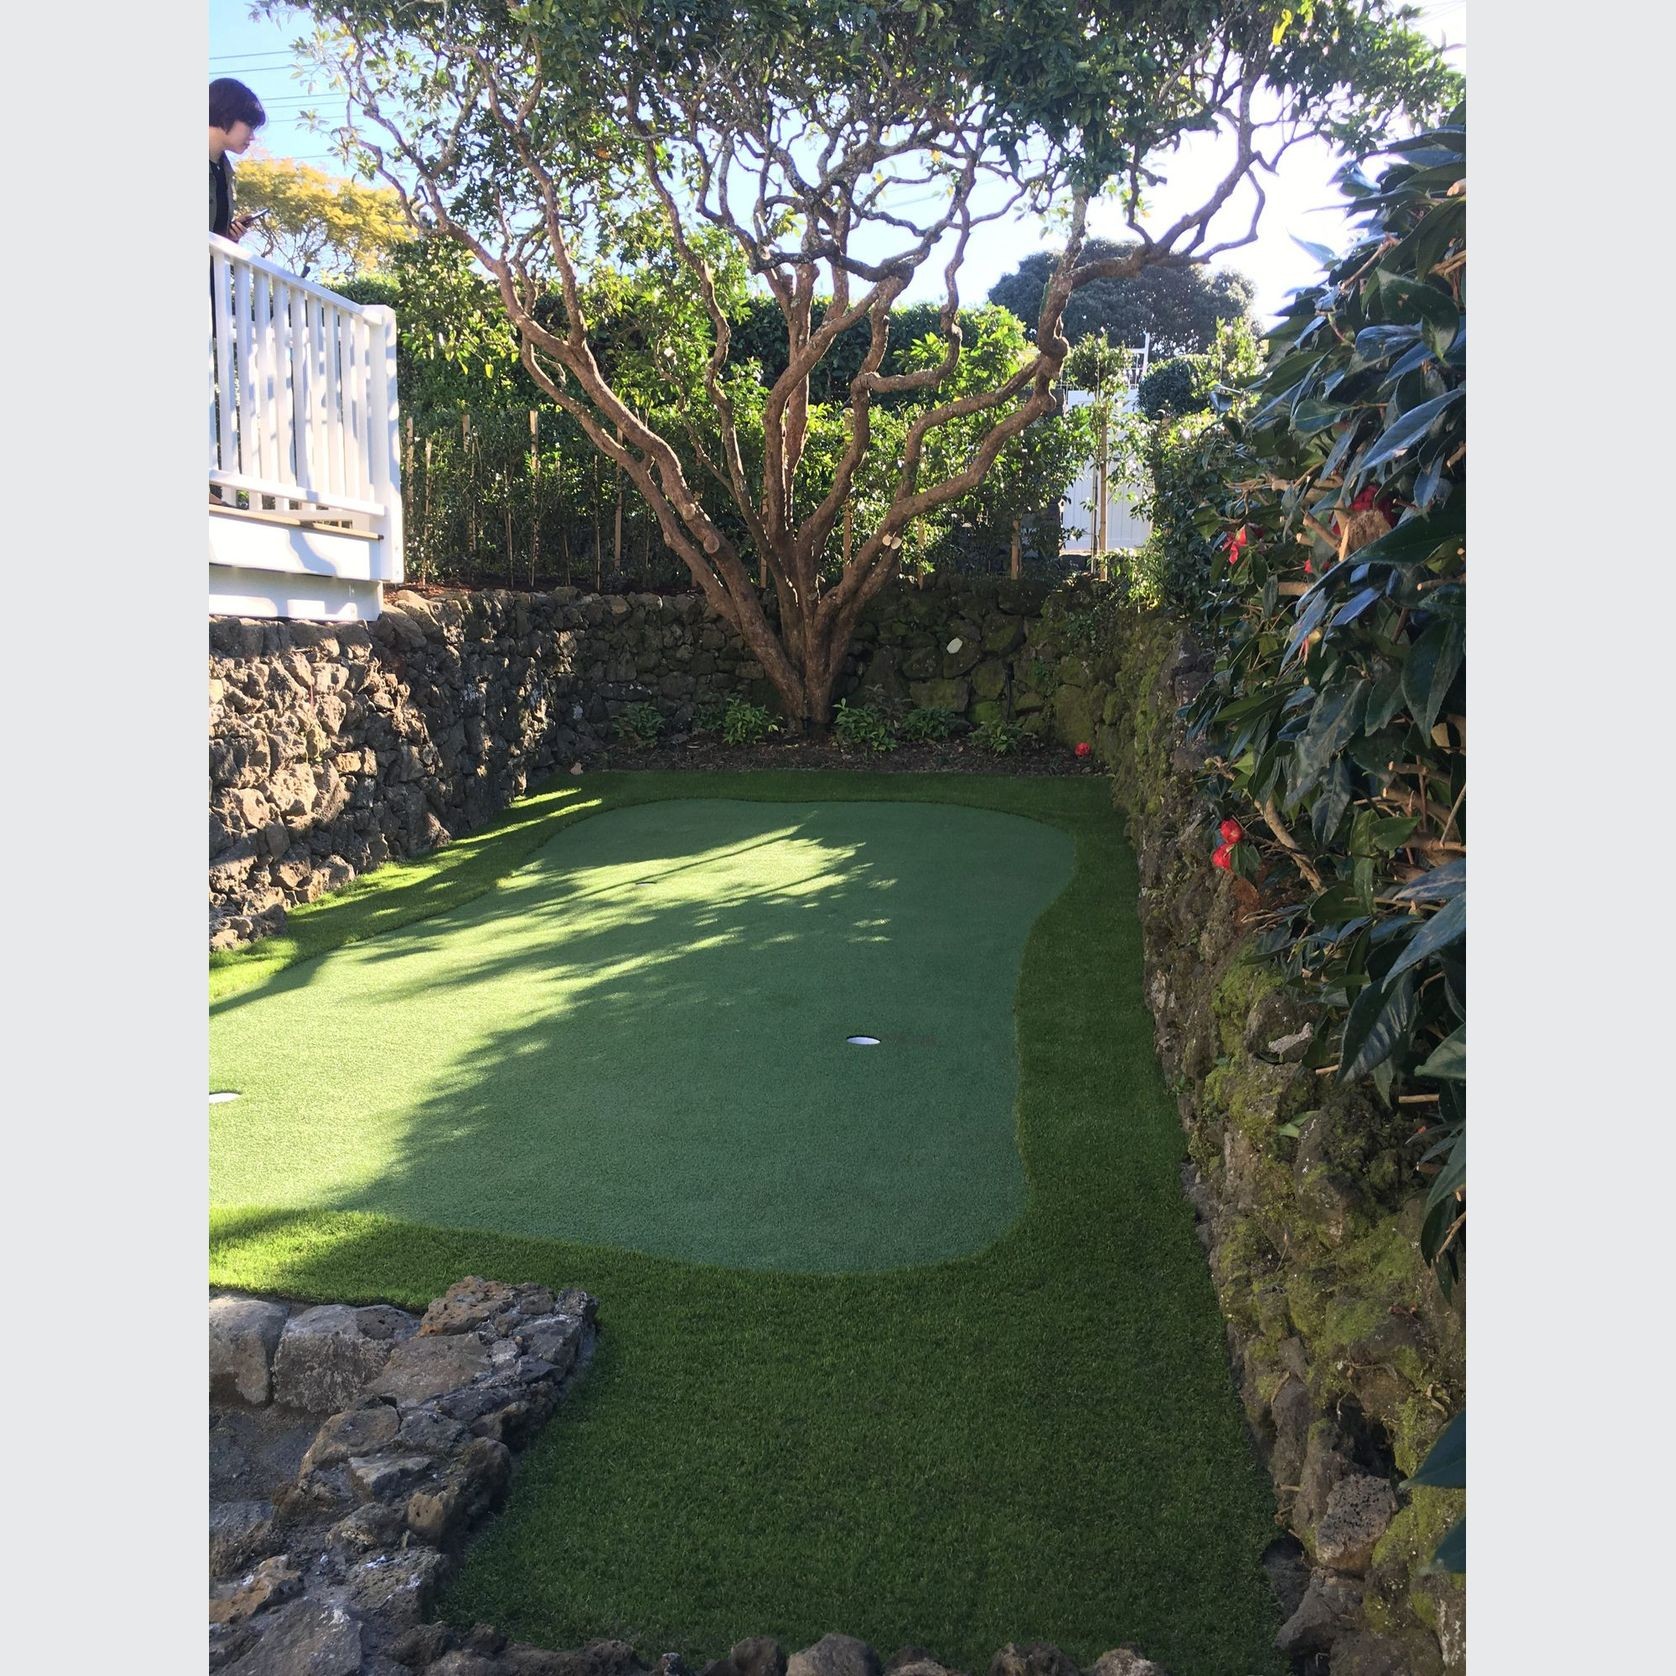 Residential Artificial Grass gallery detail image